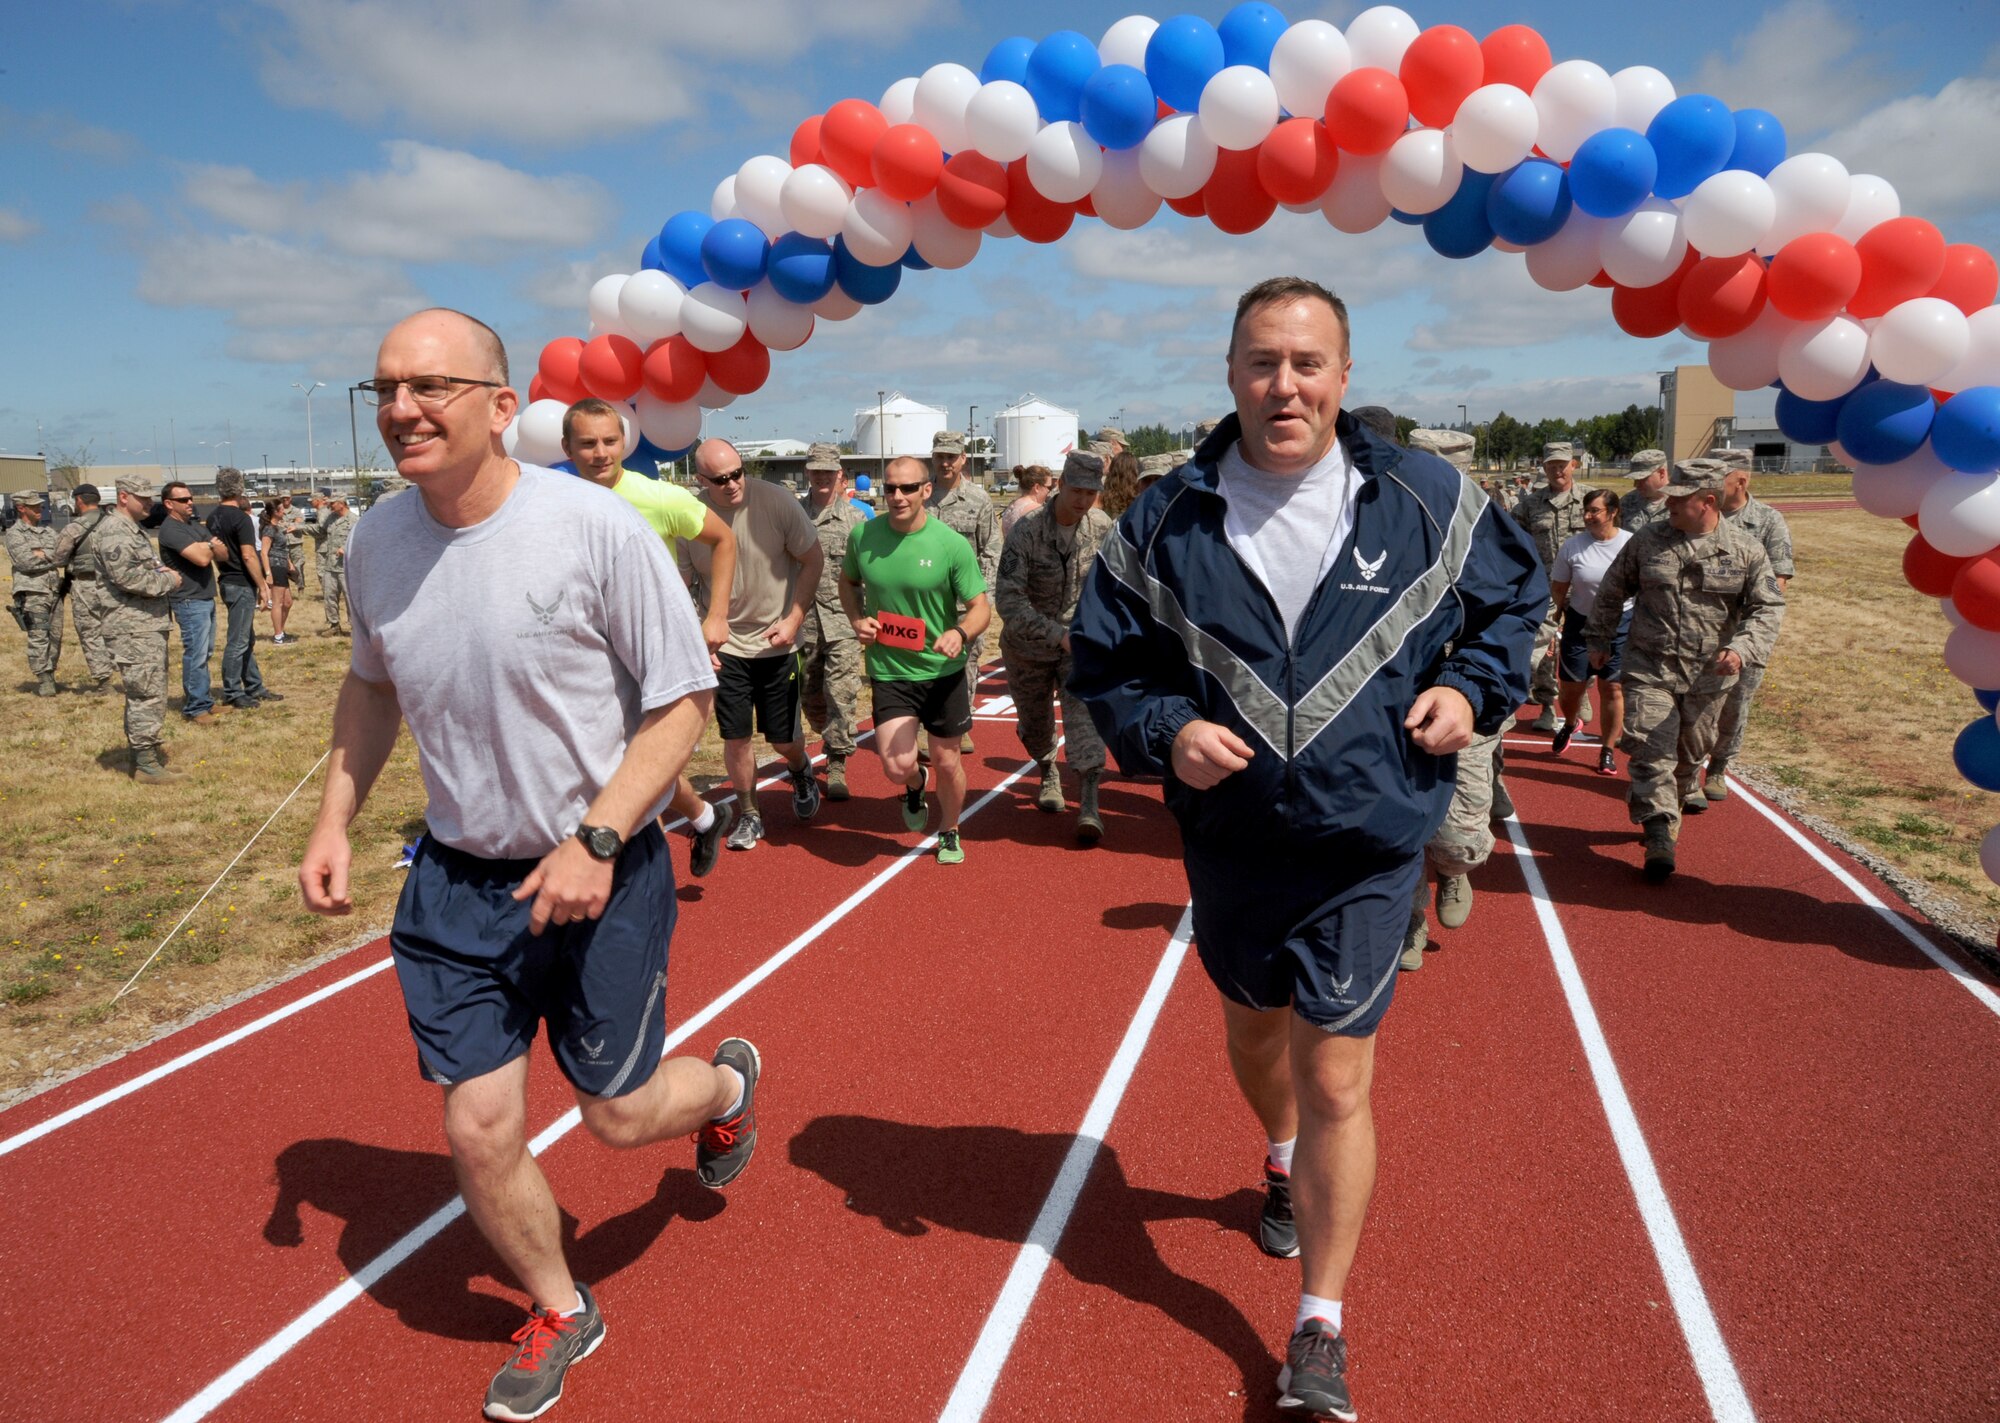 Oregon Air National Guard Col. Paul Fitzgerald, 142nd Fighter Wing commander, left, and Chief Master Sgt. Chris Roper, 142nd Fighter Wing command chief, right, lead a group of Airmen and base staff during a ceremonial first lap as part of the official opening of the new base track, Portland Air National Guard Base, Ore., July 26, 2016. (U.S. Air National Guard photo by Tech. Sgt. John Hughel, 142nd Fighter Wing Public Affairs/Released)